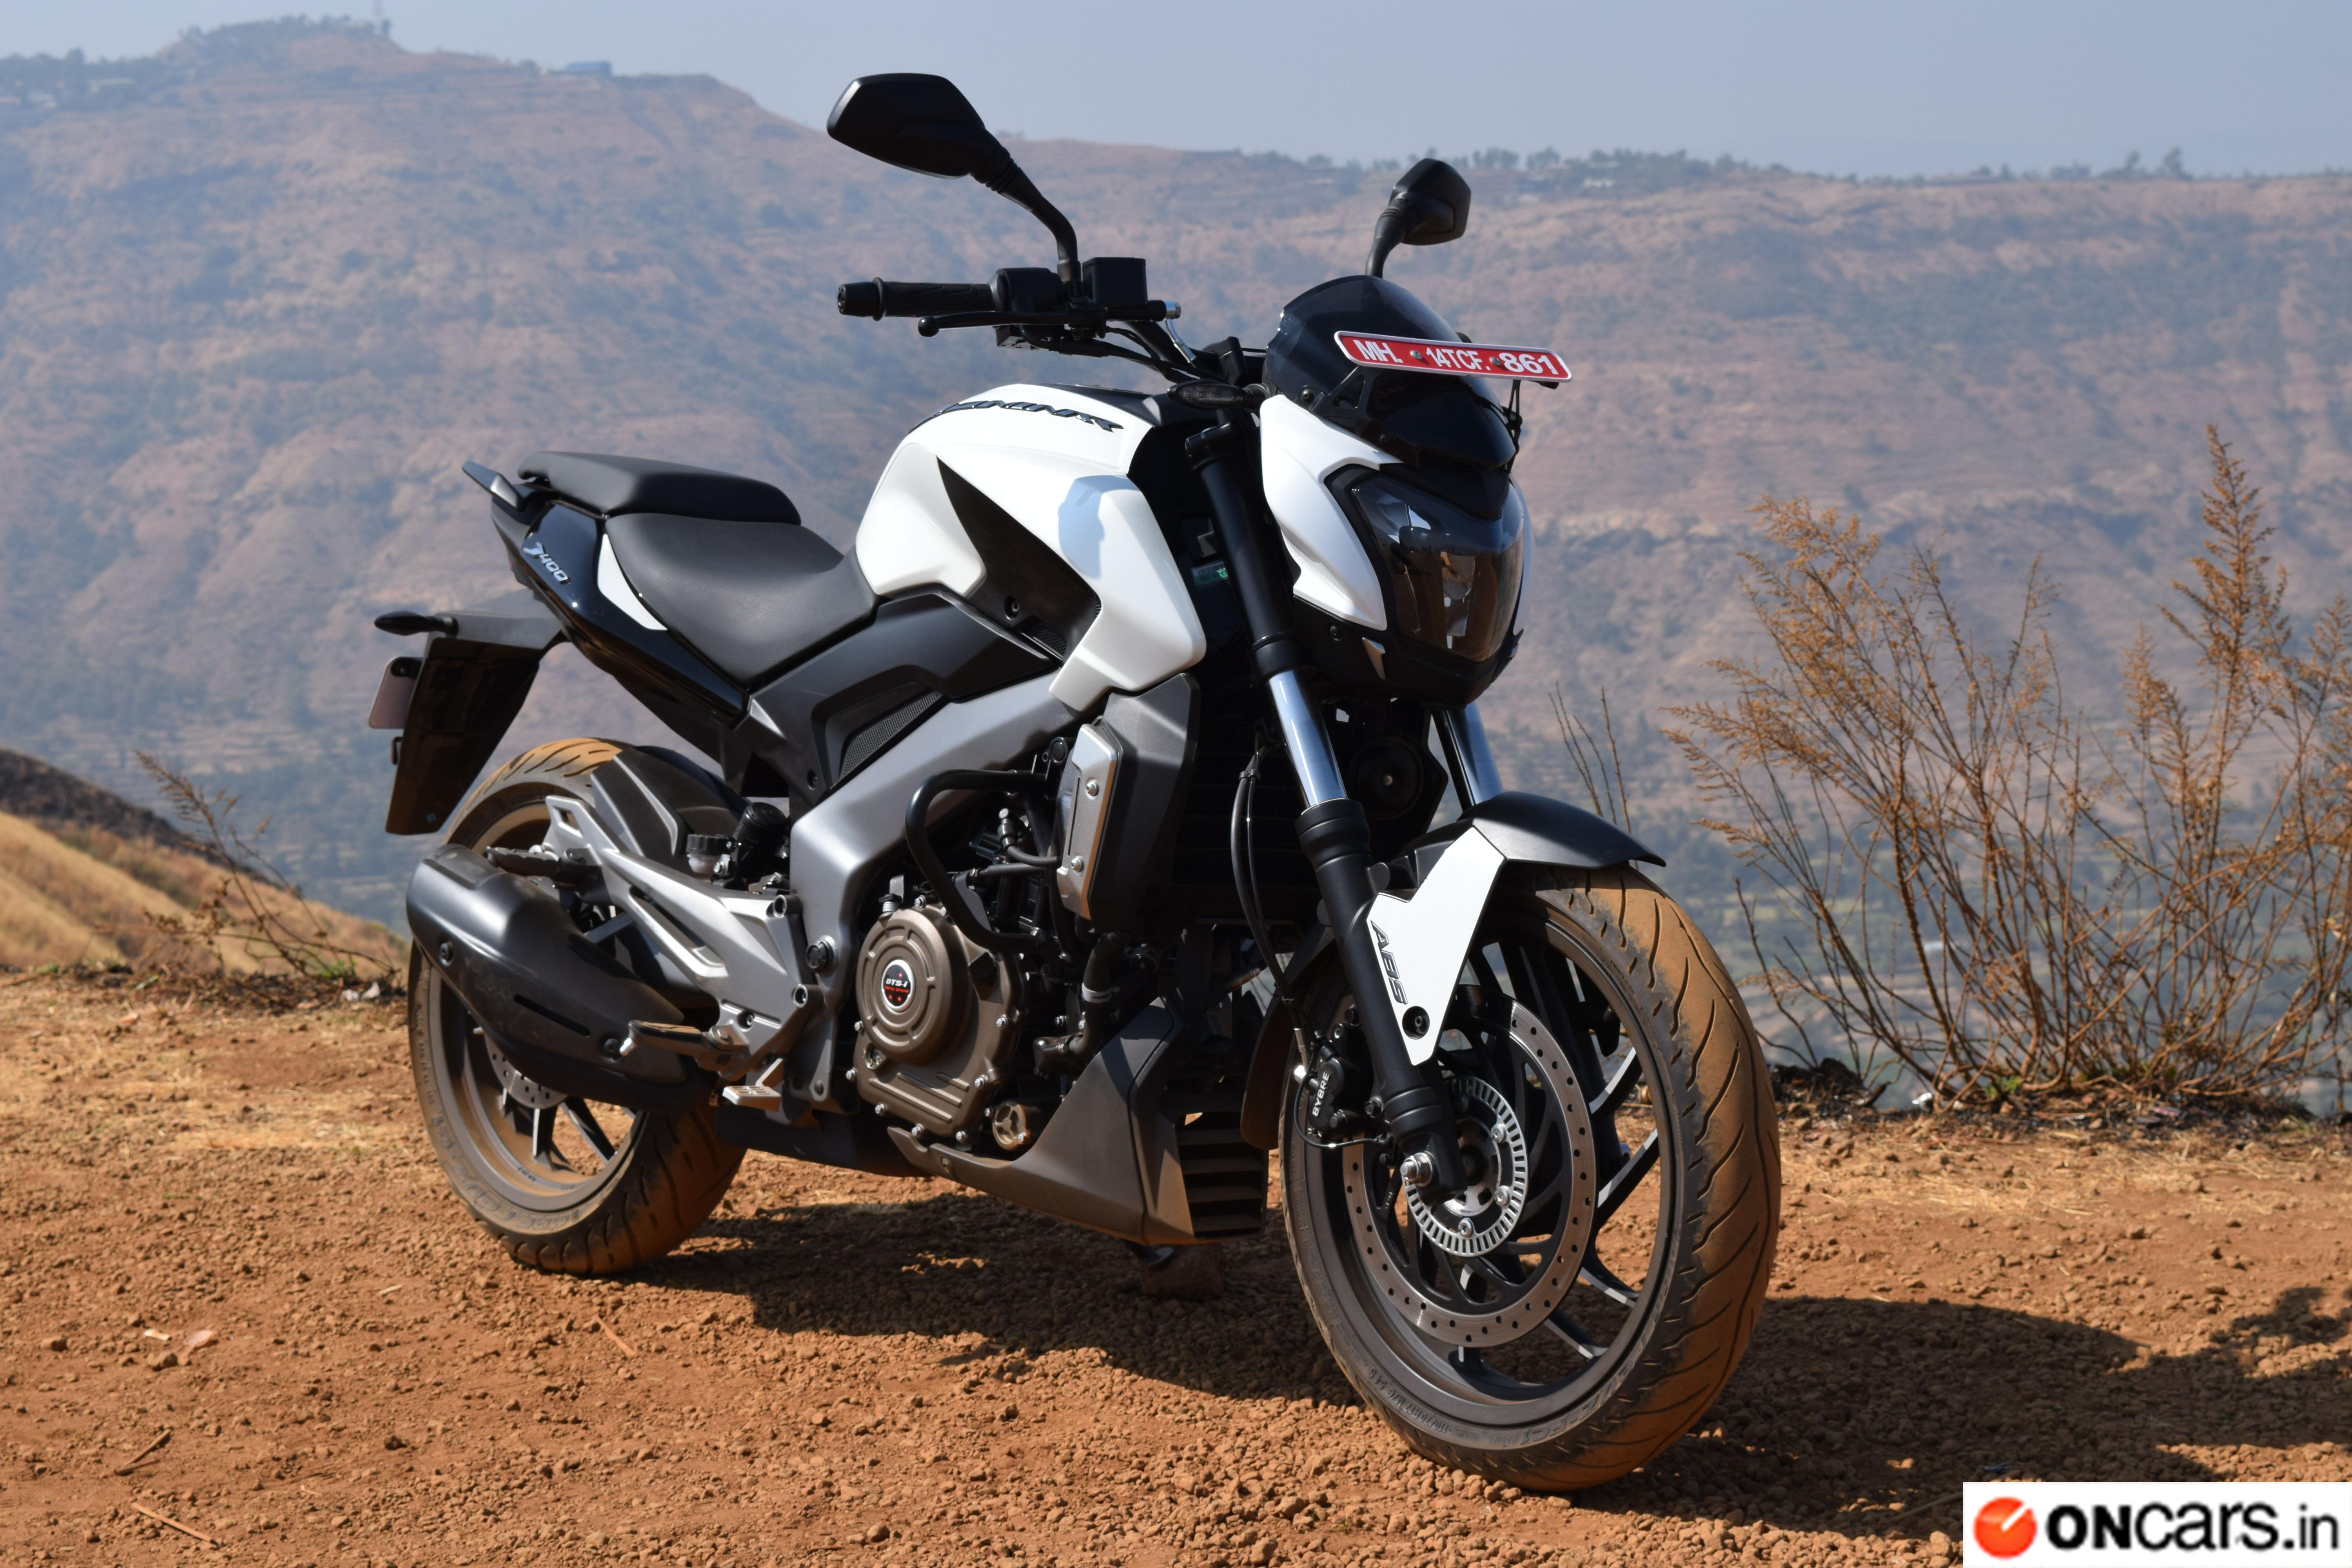 Bajaj Dominar 400 First Ride Review: Dominating its perception as a